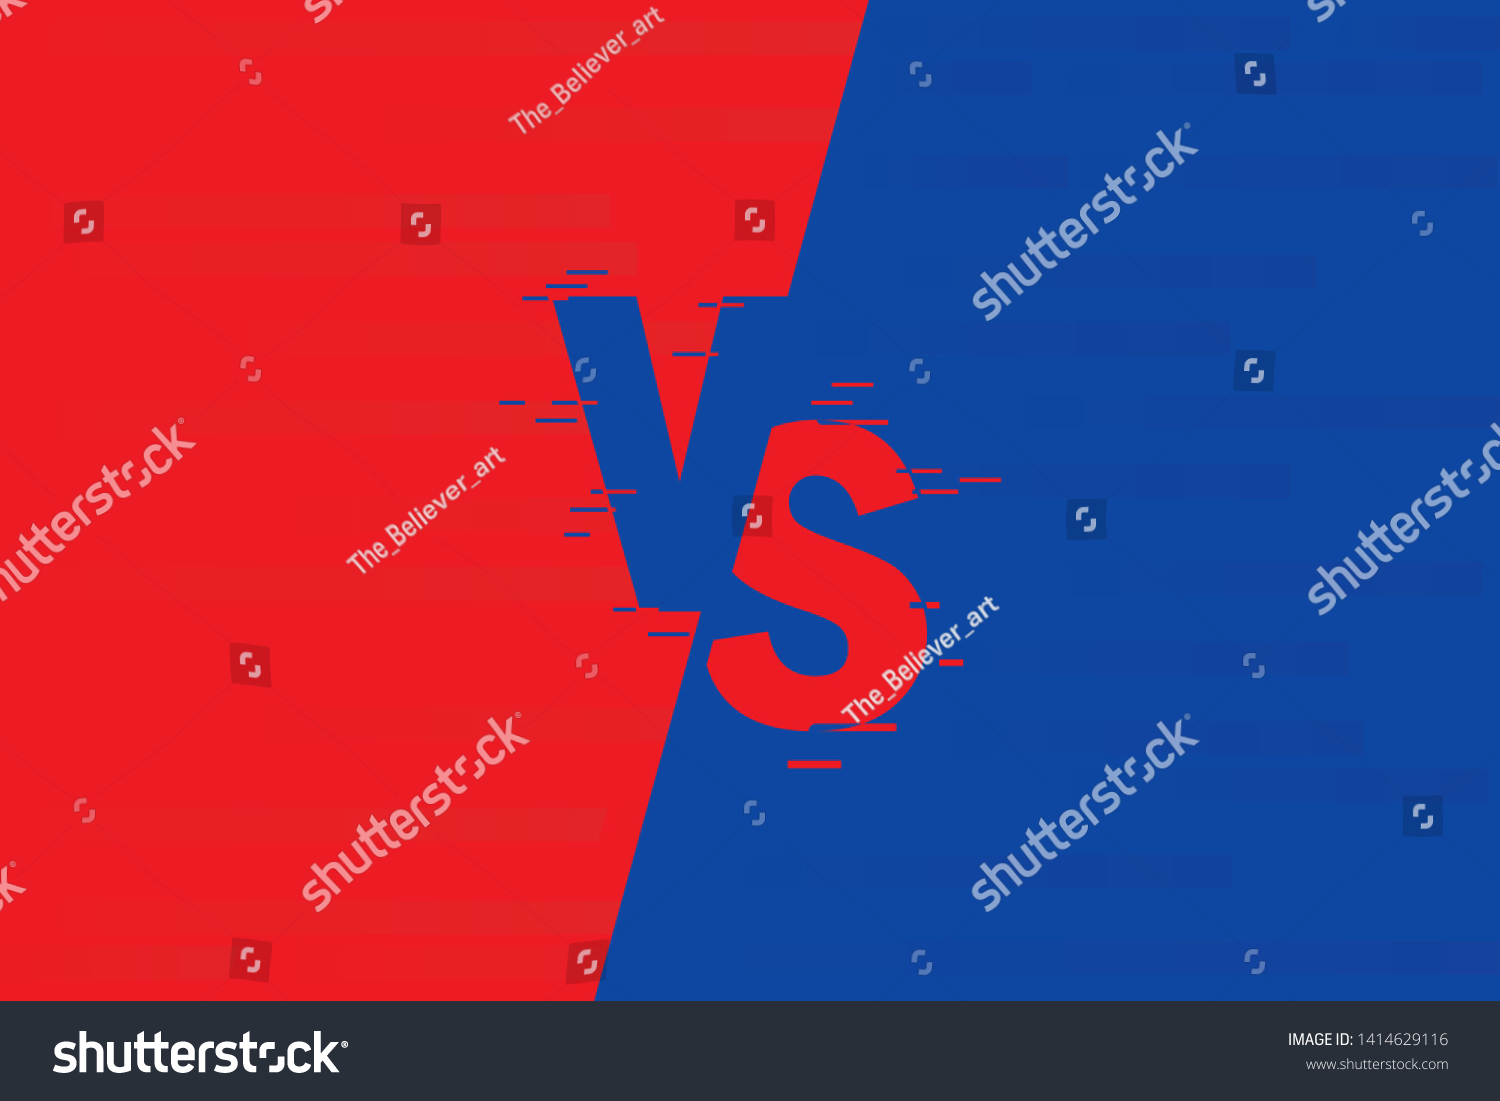 Vs Fight Backgrounds Against Each Other Stock Vector Royalty Free